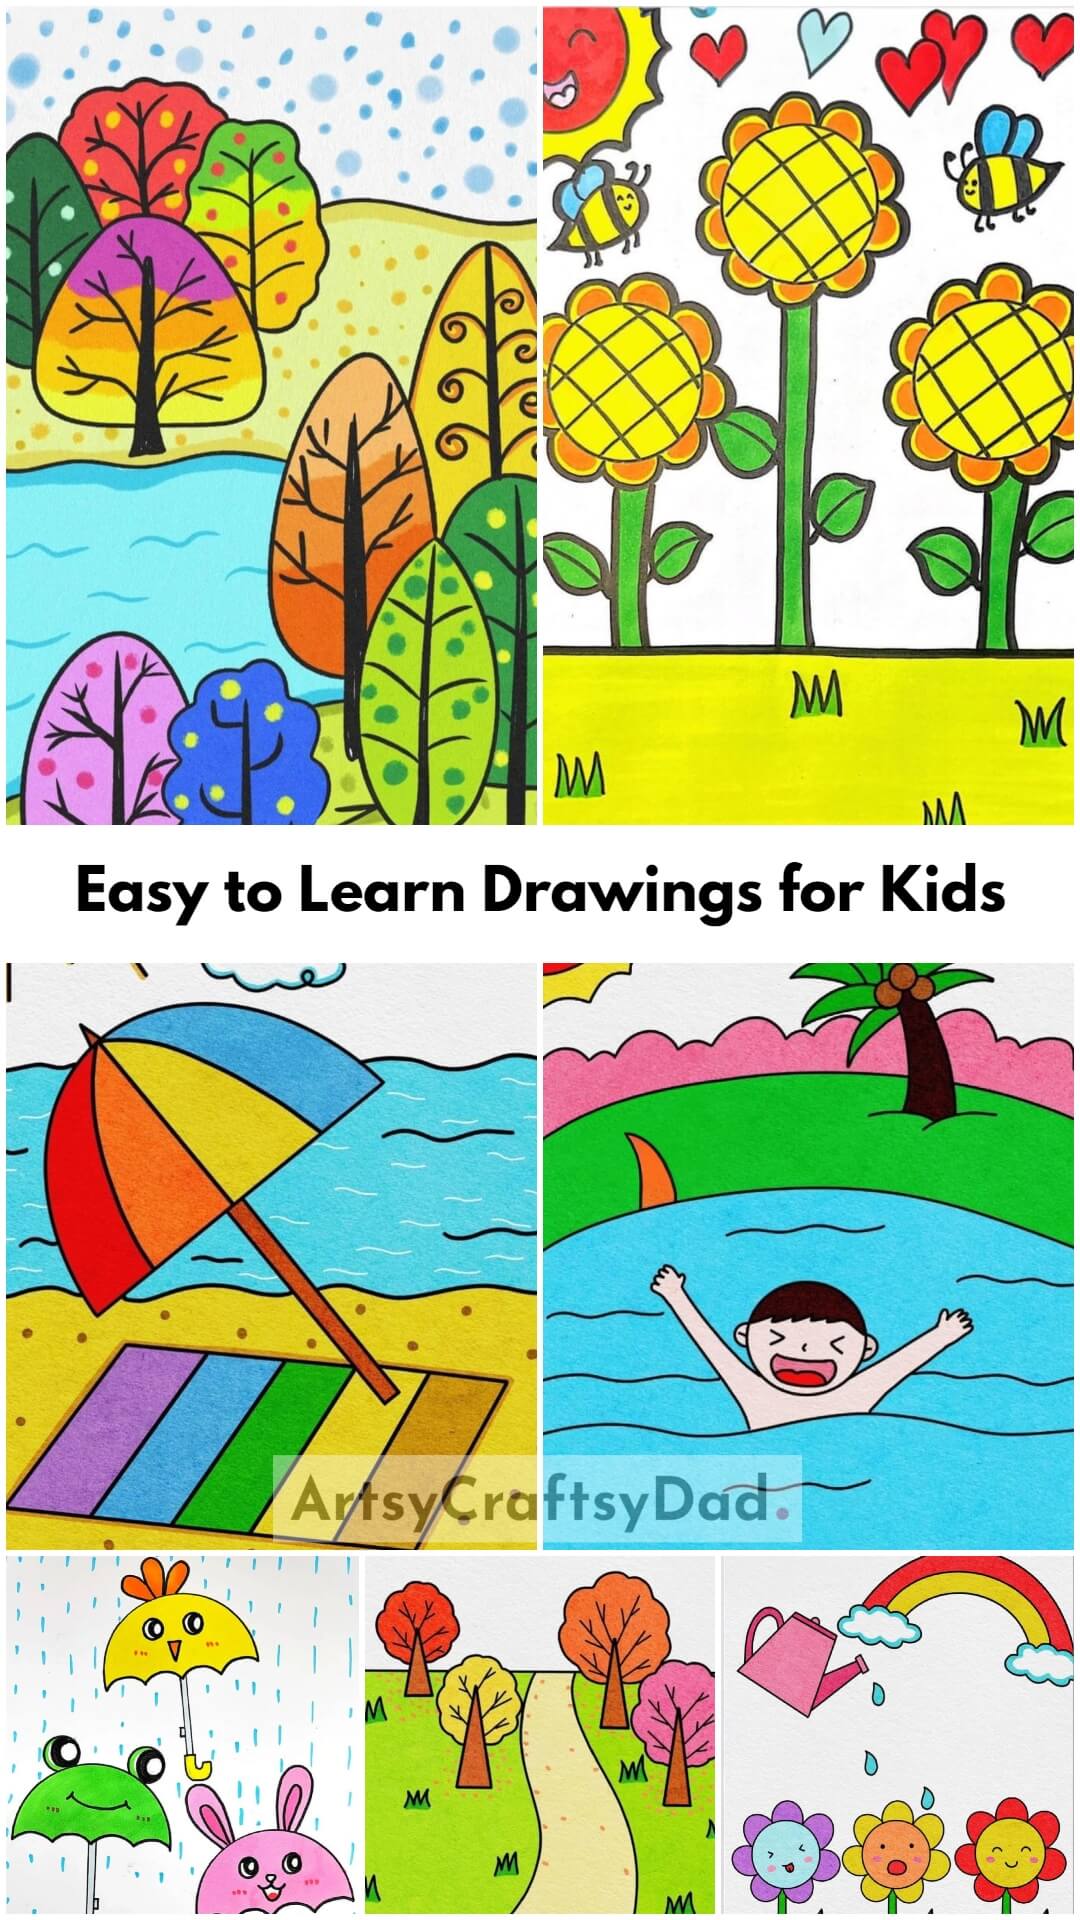 Easy to Learn Drawings for Kids